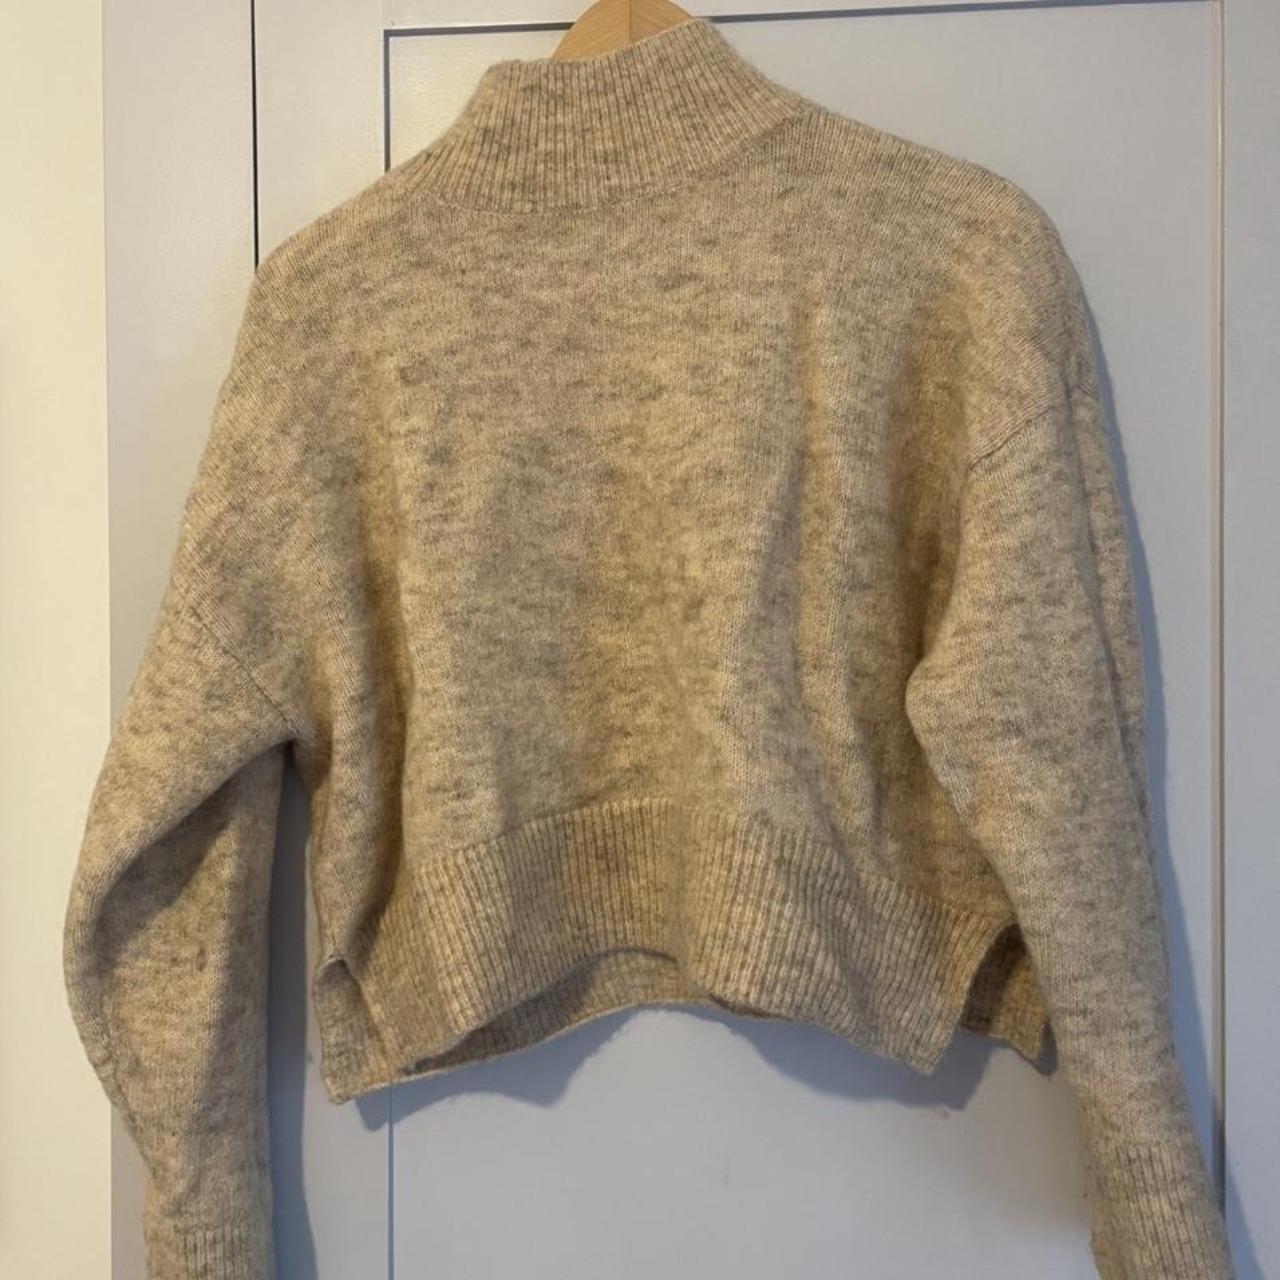 & Other Stories tan jumper Made of wool and... - Depop